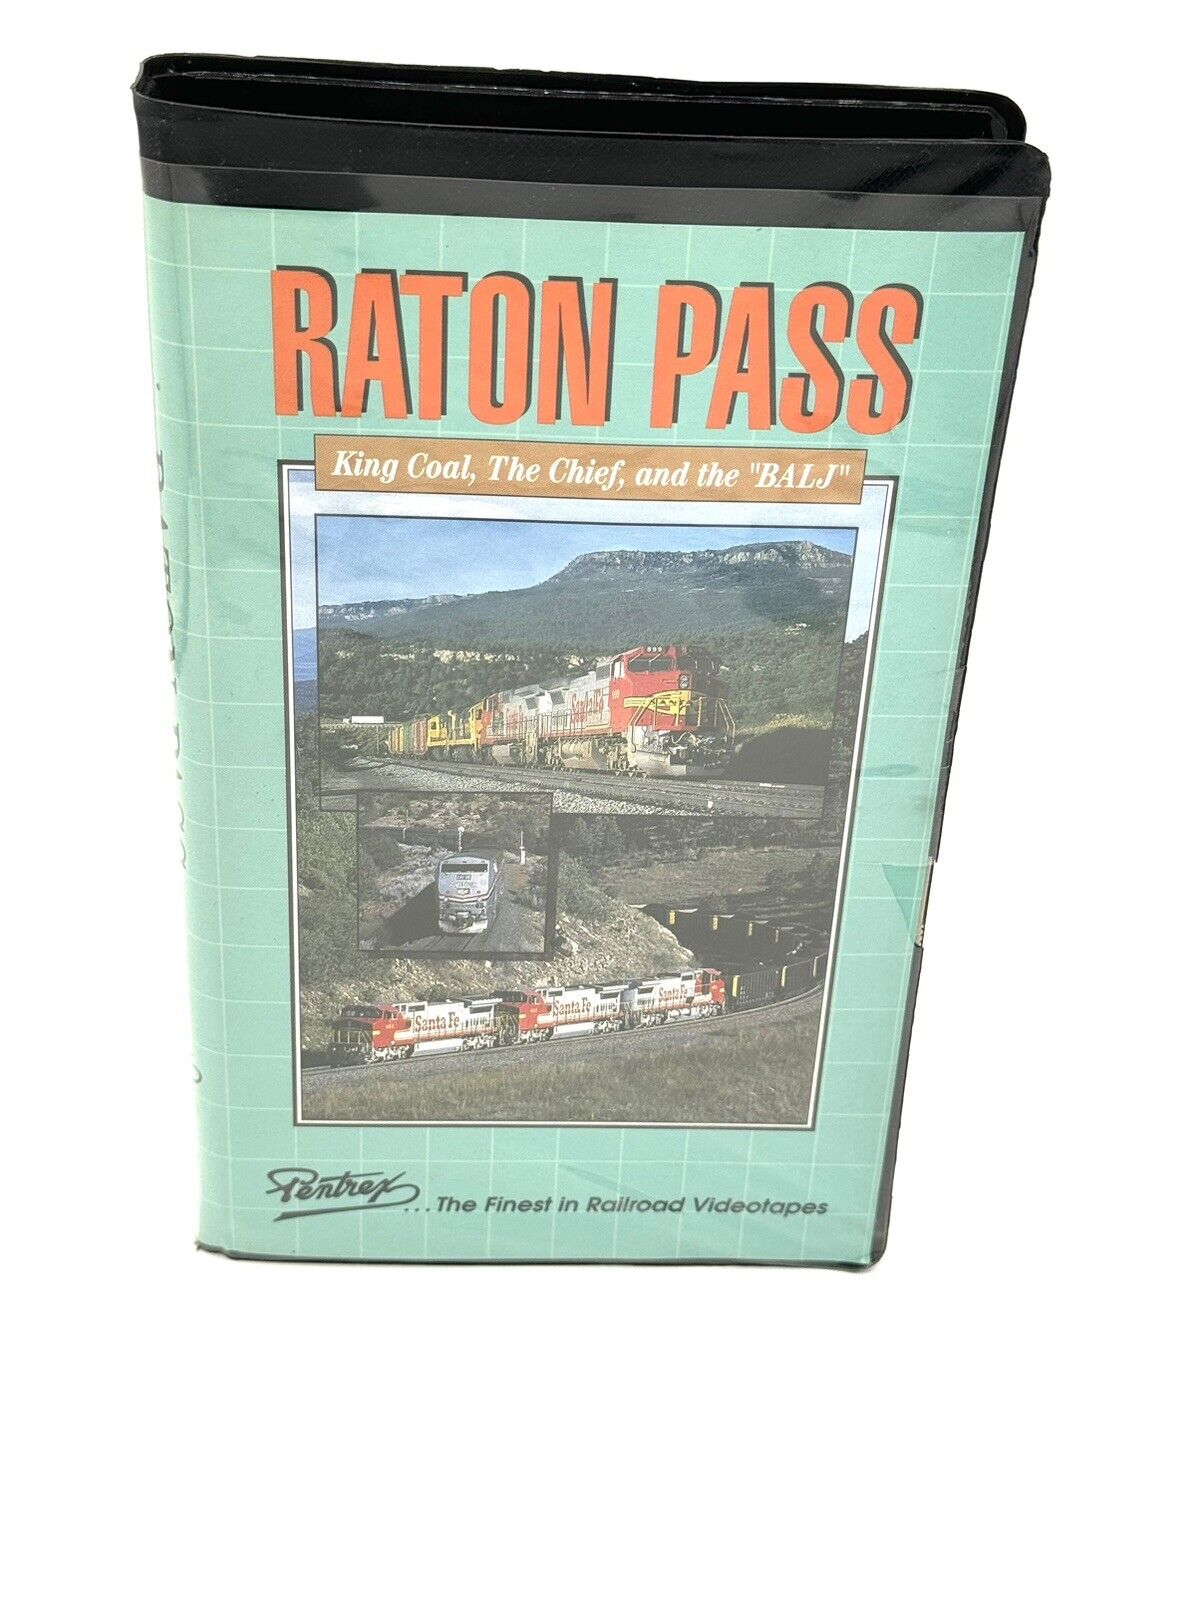 Pentrex VHS Raton Pass King Coal, The Chief, and the \